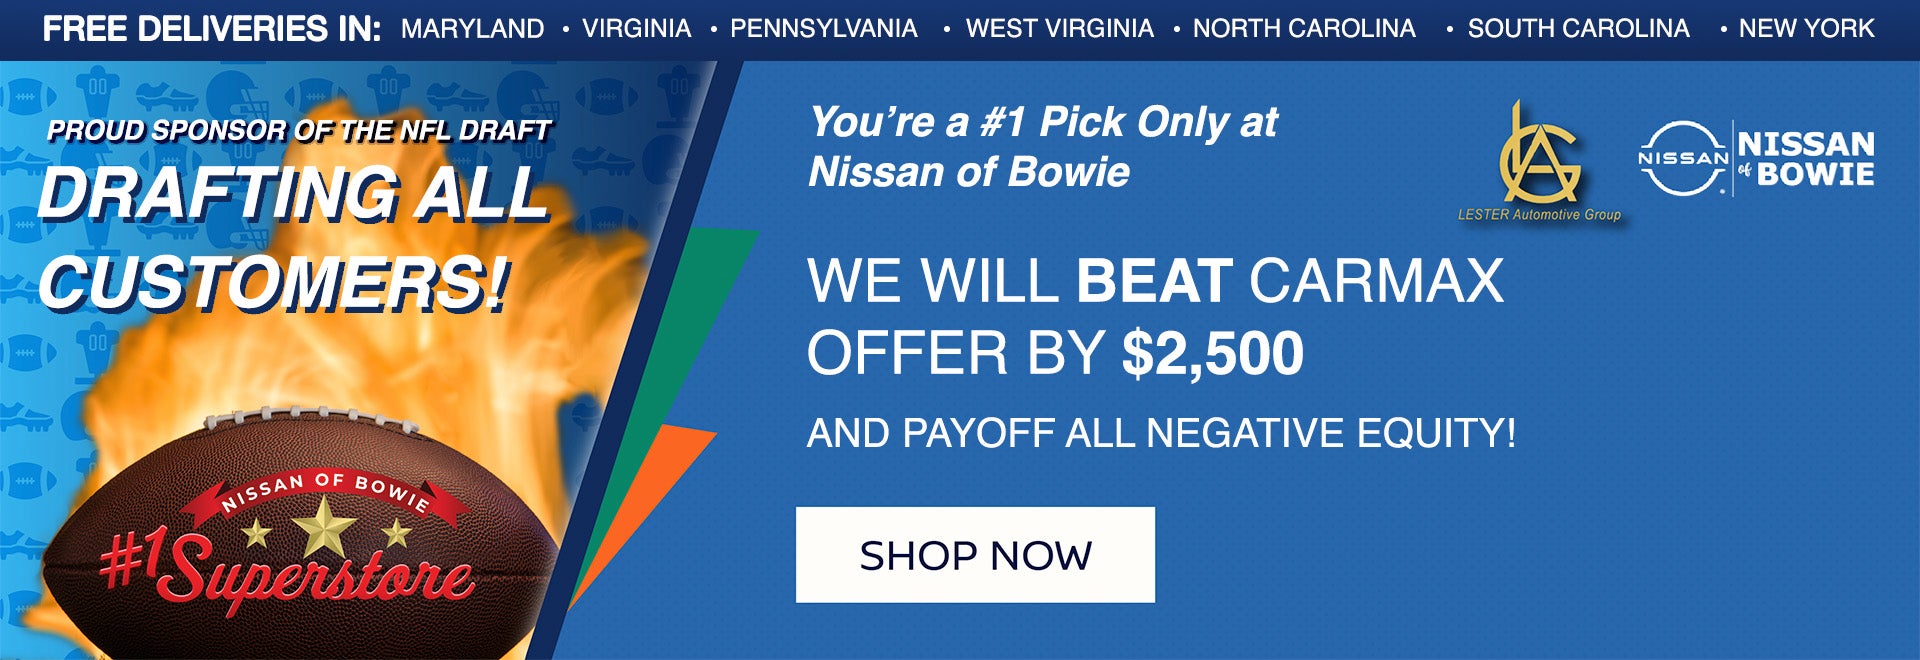 We will beat Carmax offer by $2,500